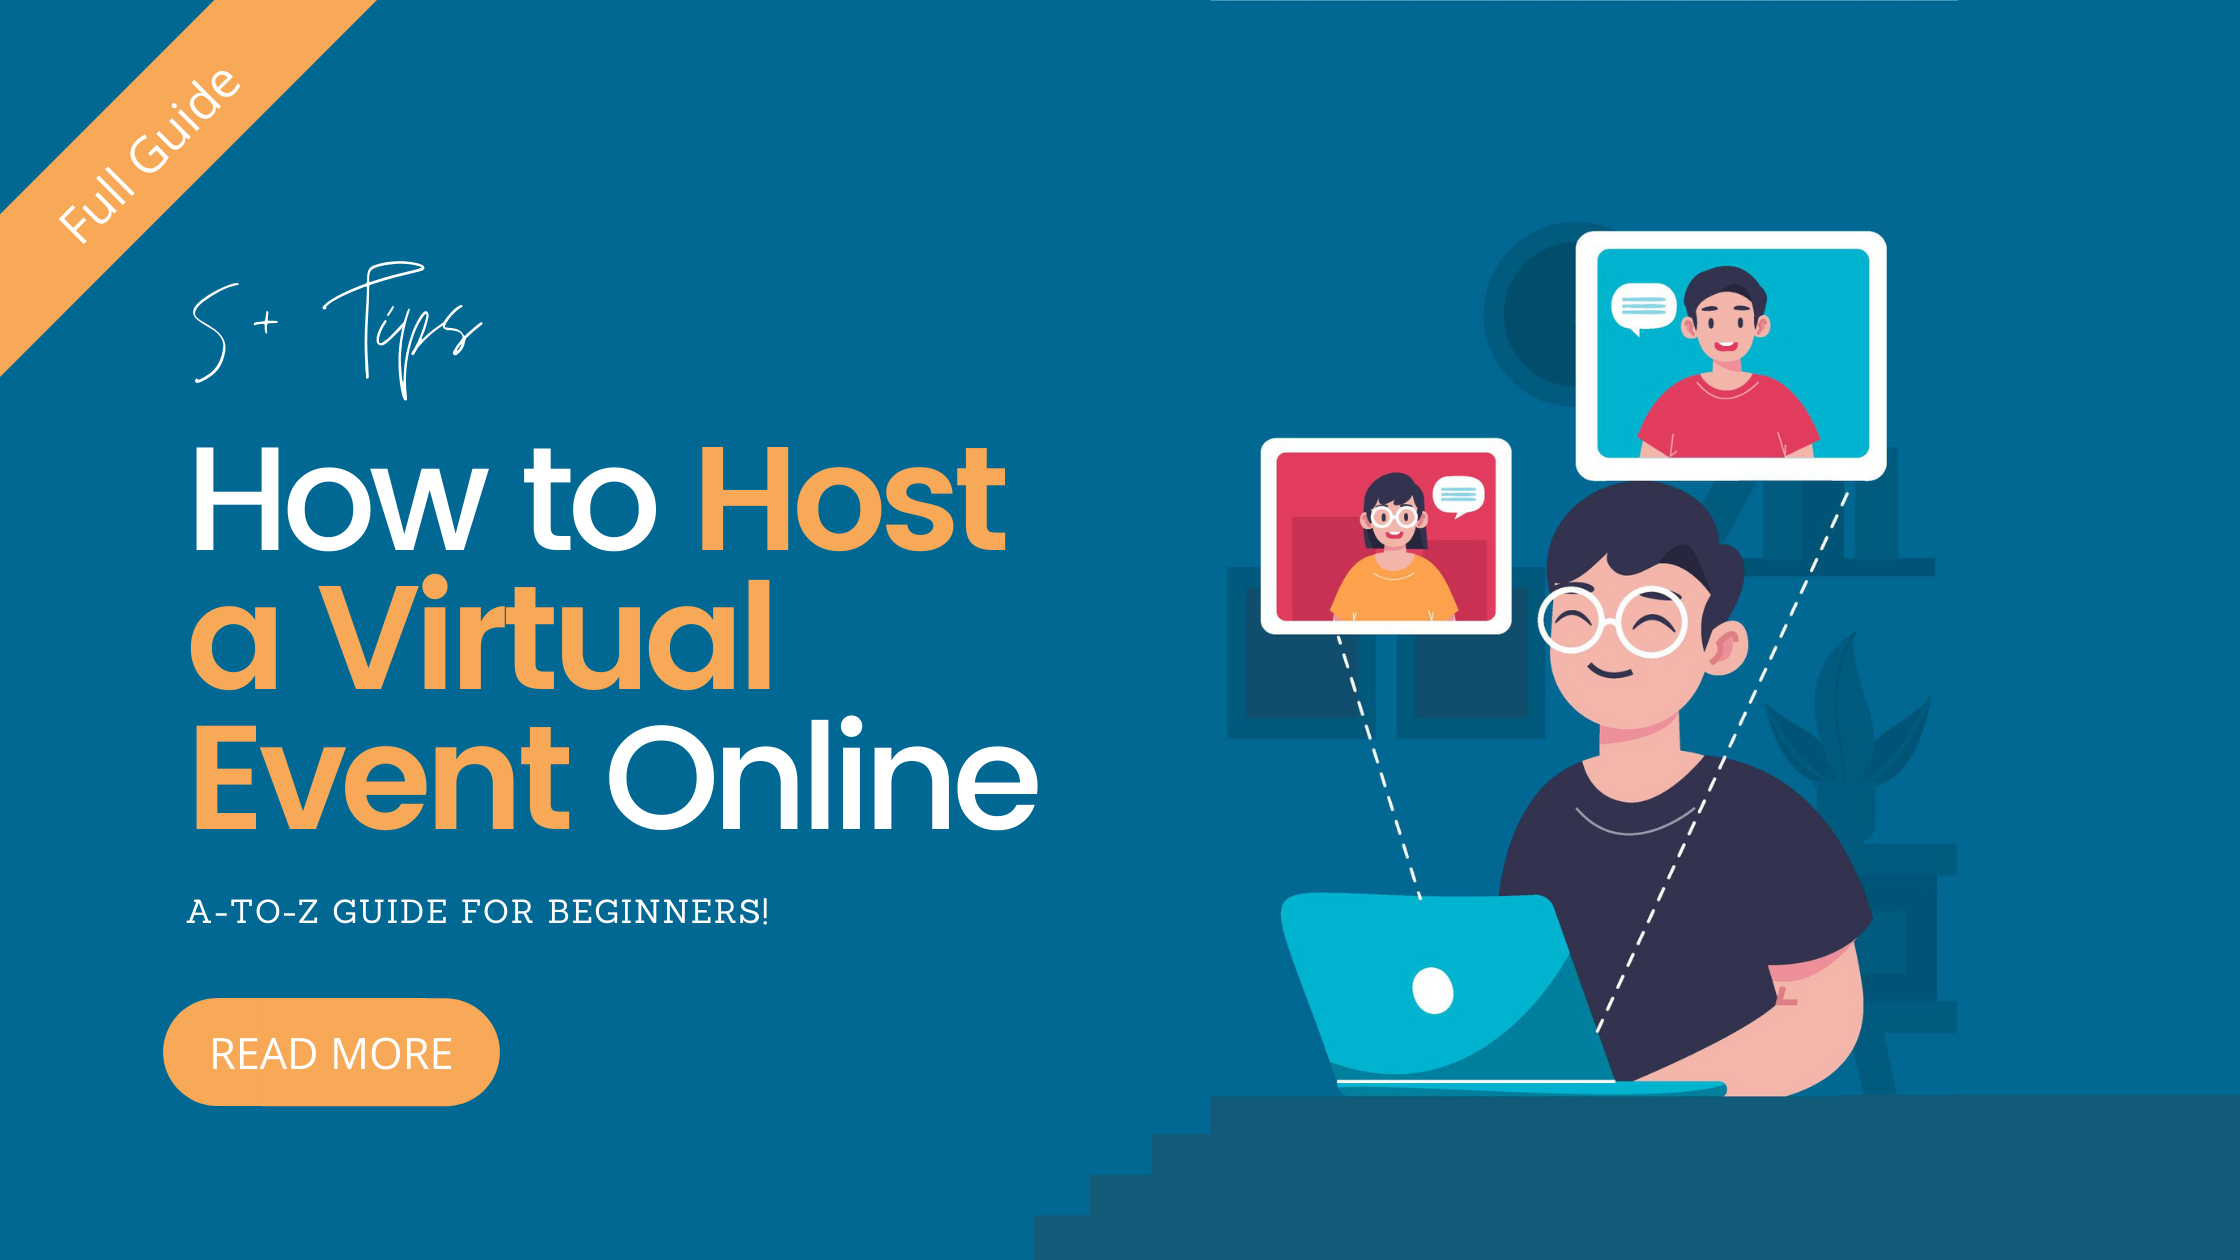 How to Host a Virtual Event Online